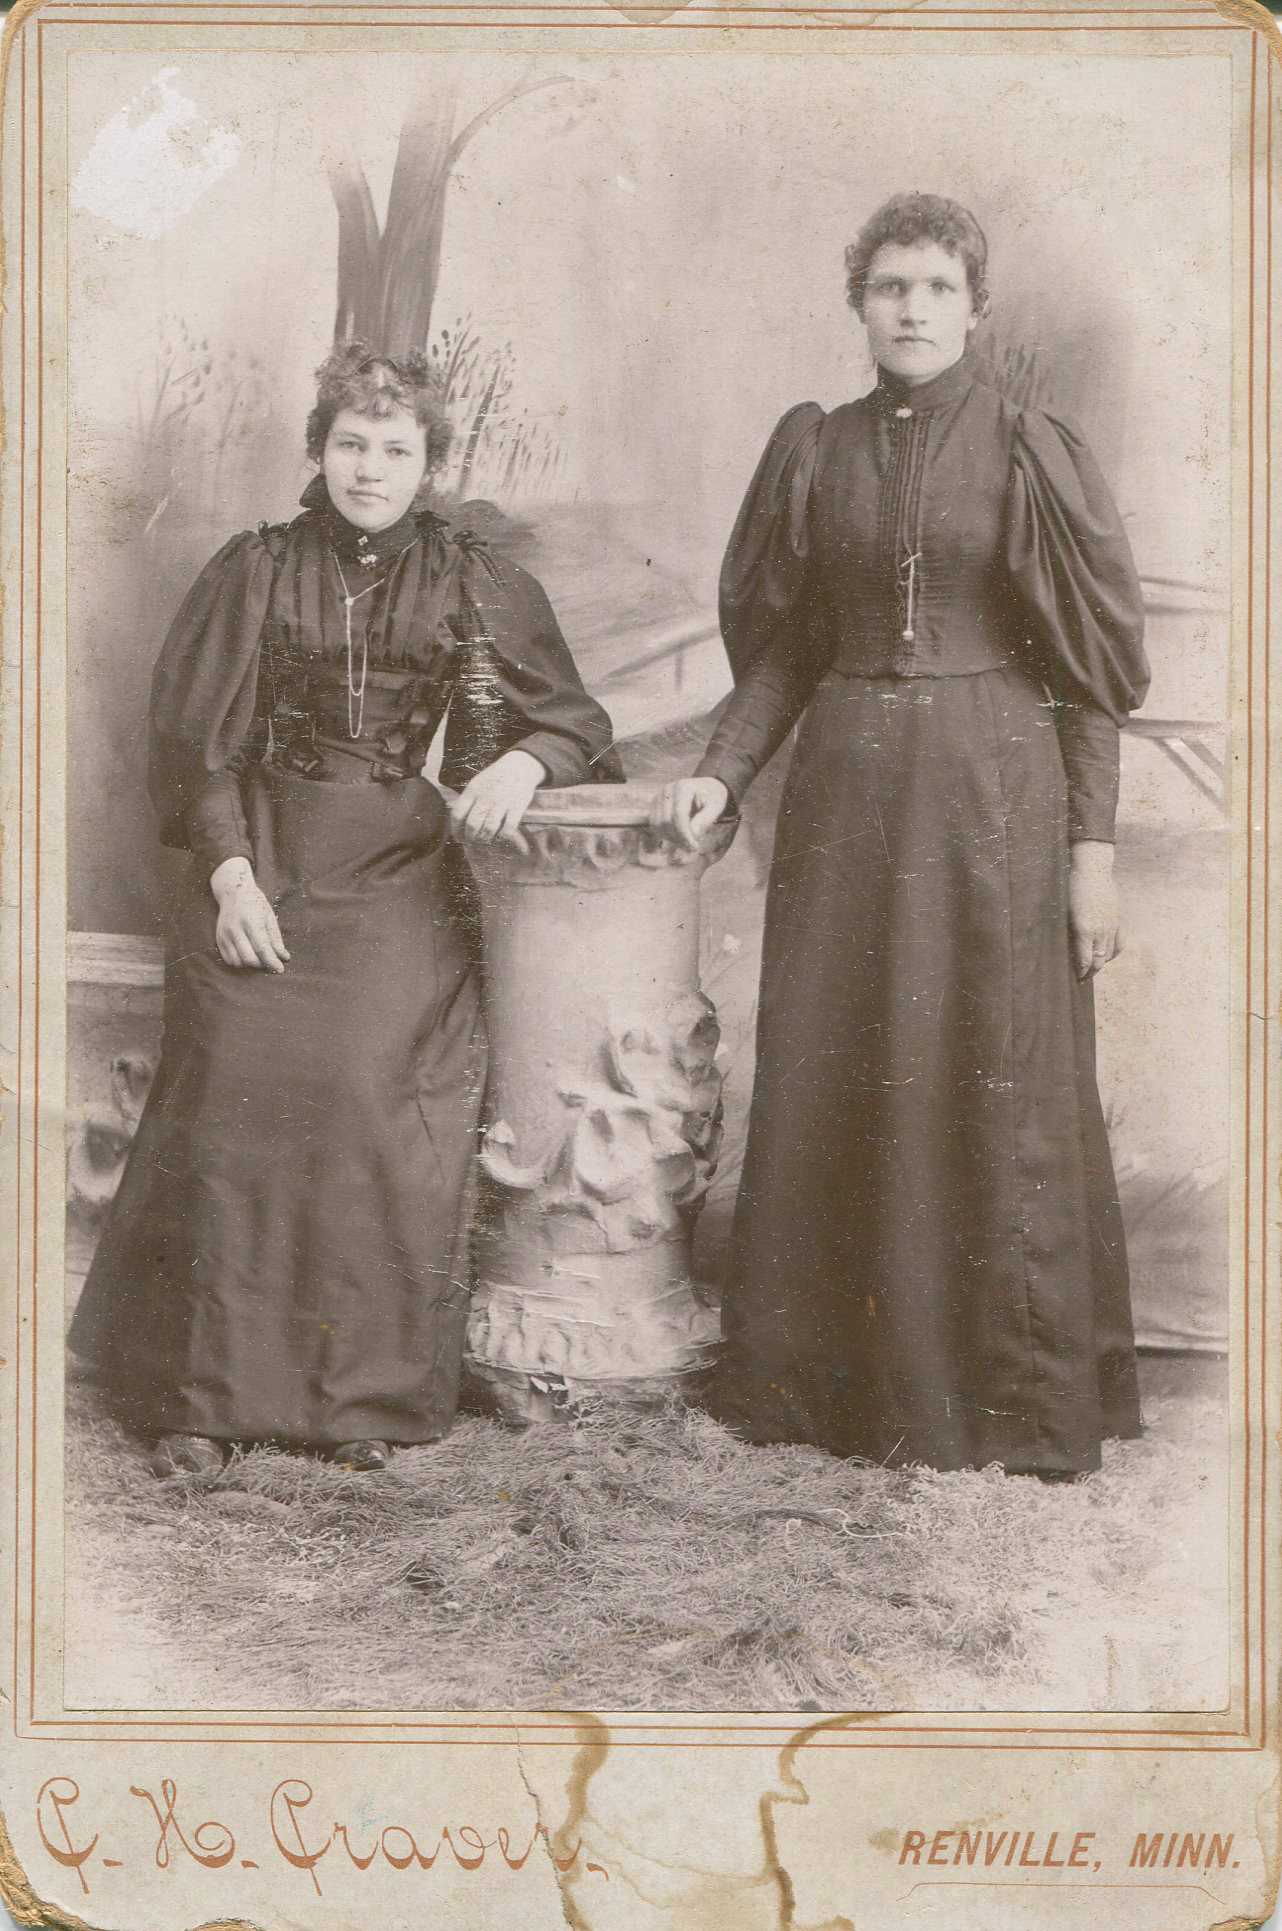 Farm wives Renville County, Minnesota, early 1900s.

[Relations of yours? -tterrace]